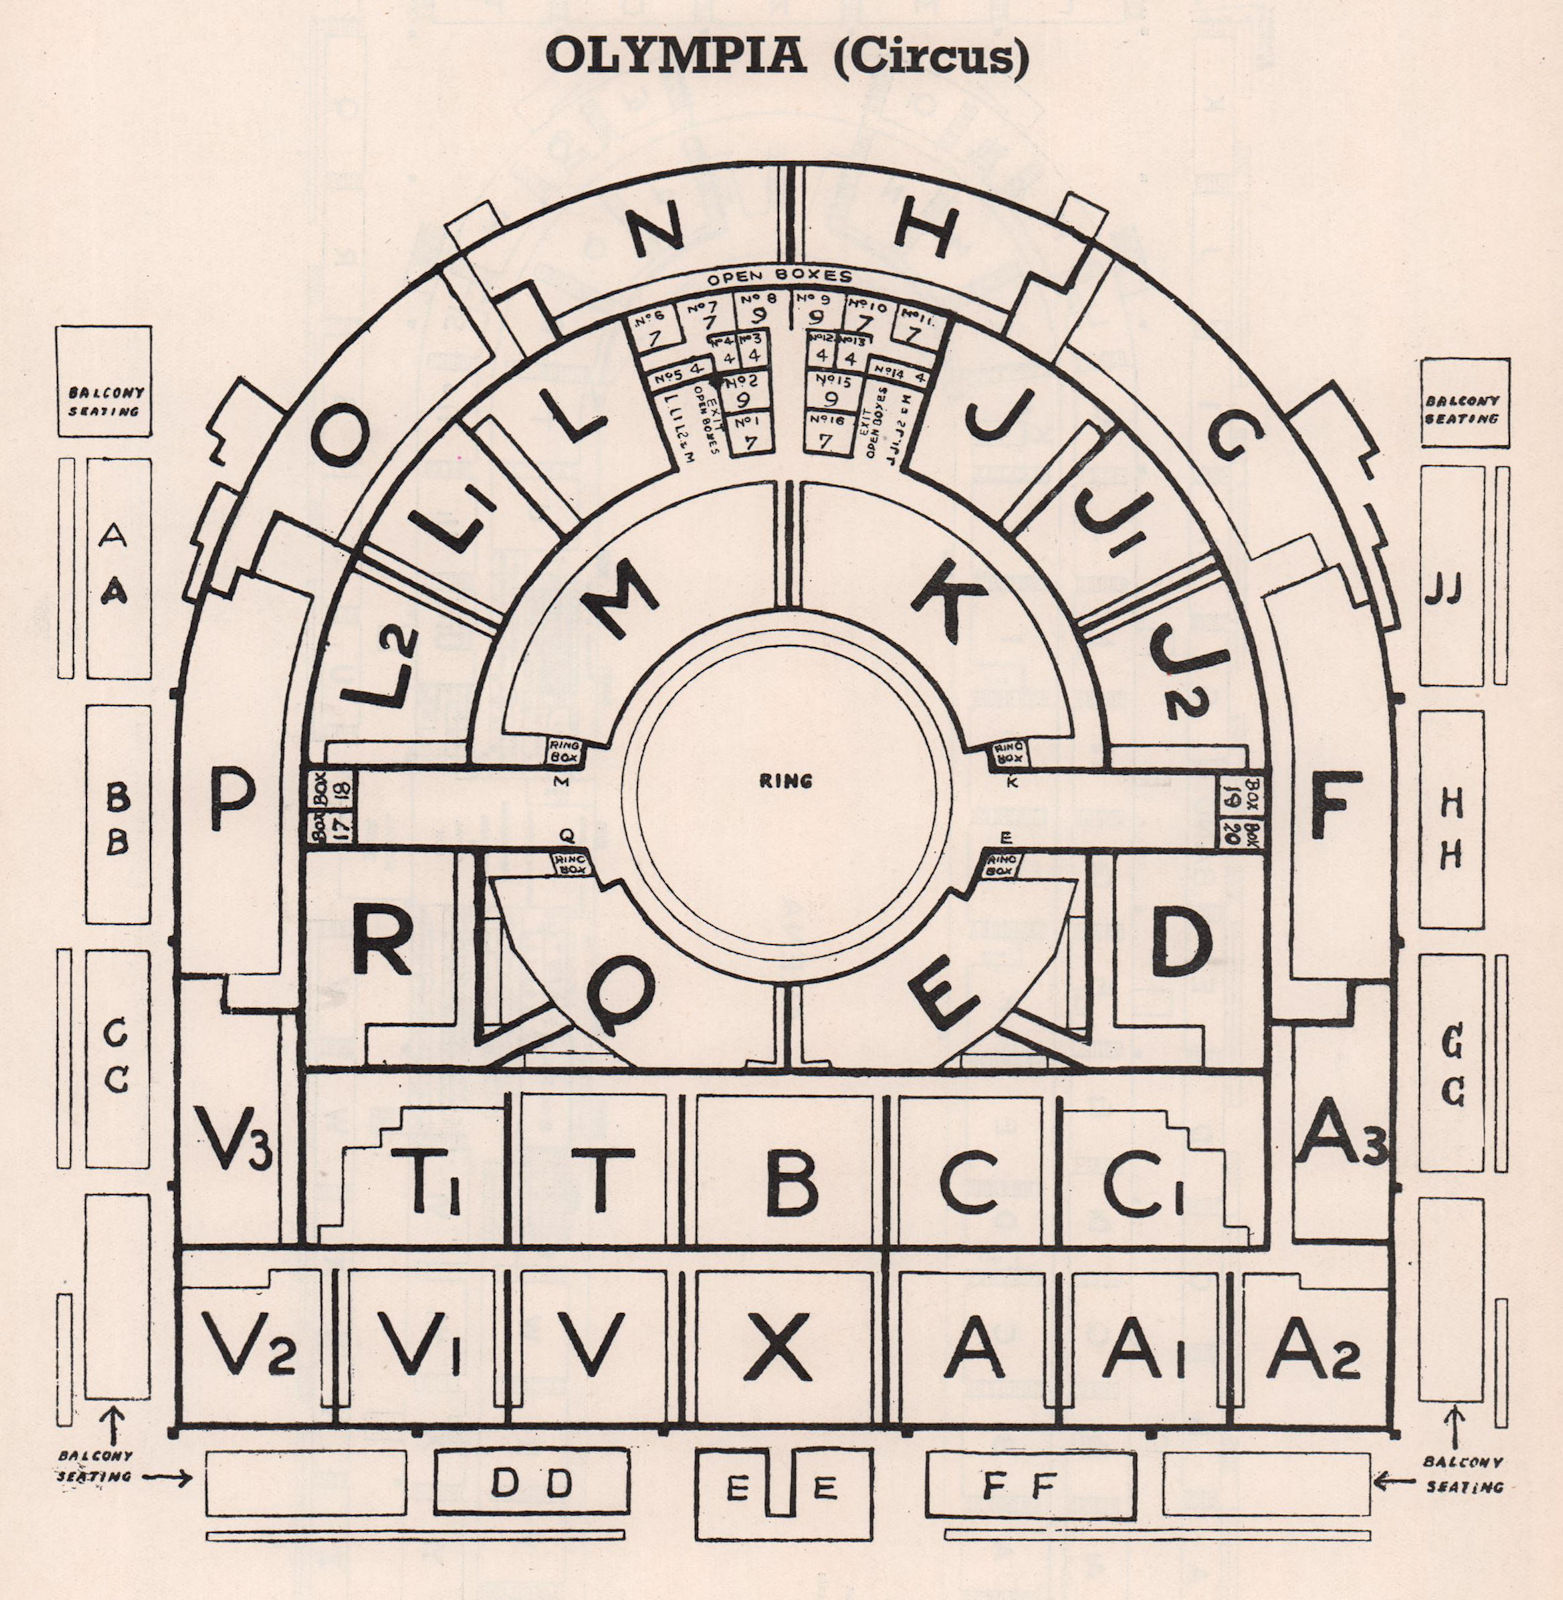 OLYMPIA CIRCUS PLAN vintage seating plan. London. Event venue 1937 old print